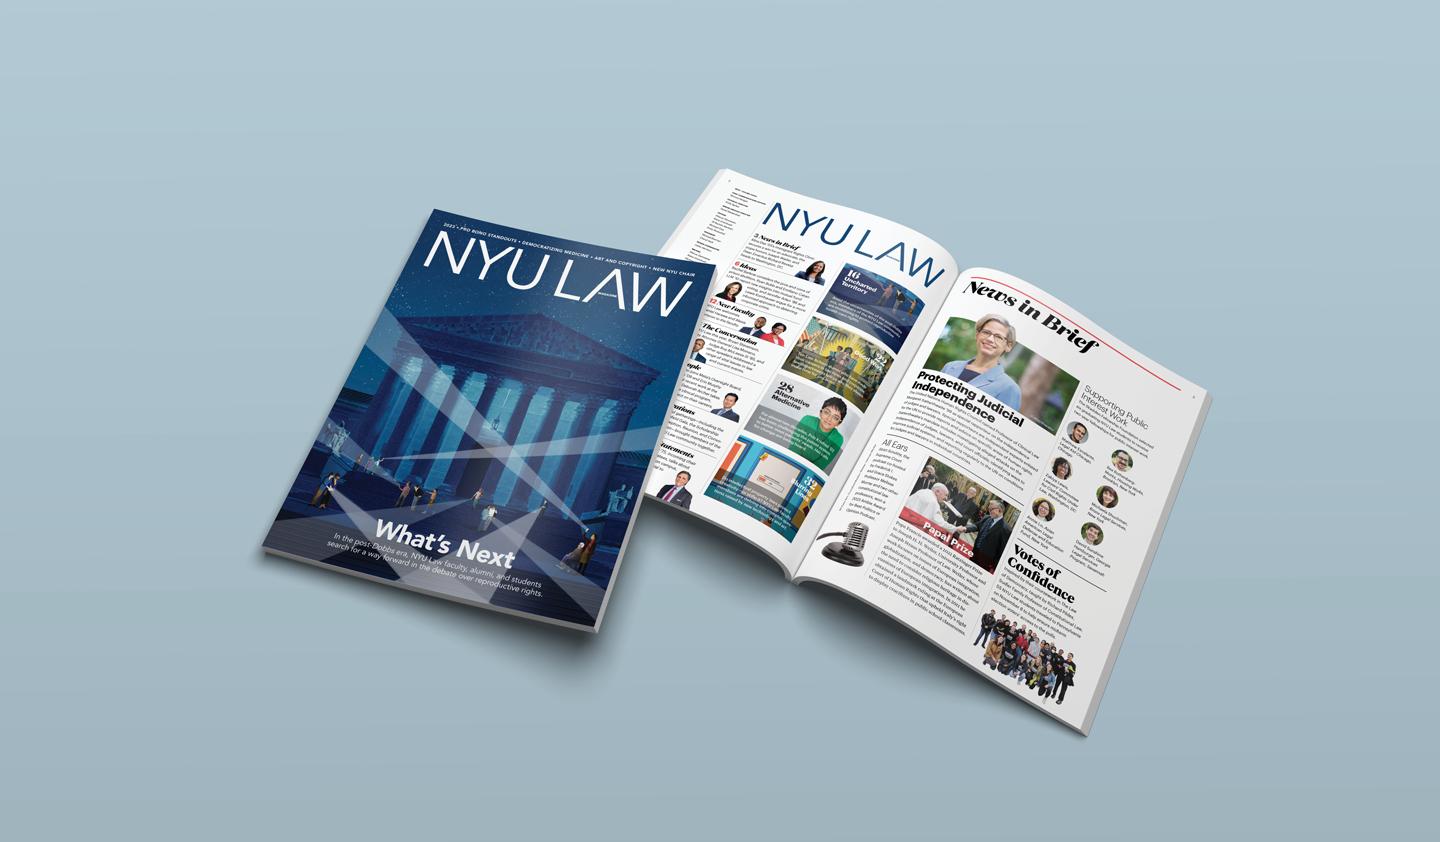 2023 NYU Law Magazine cover and open pages